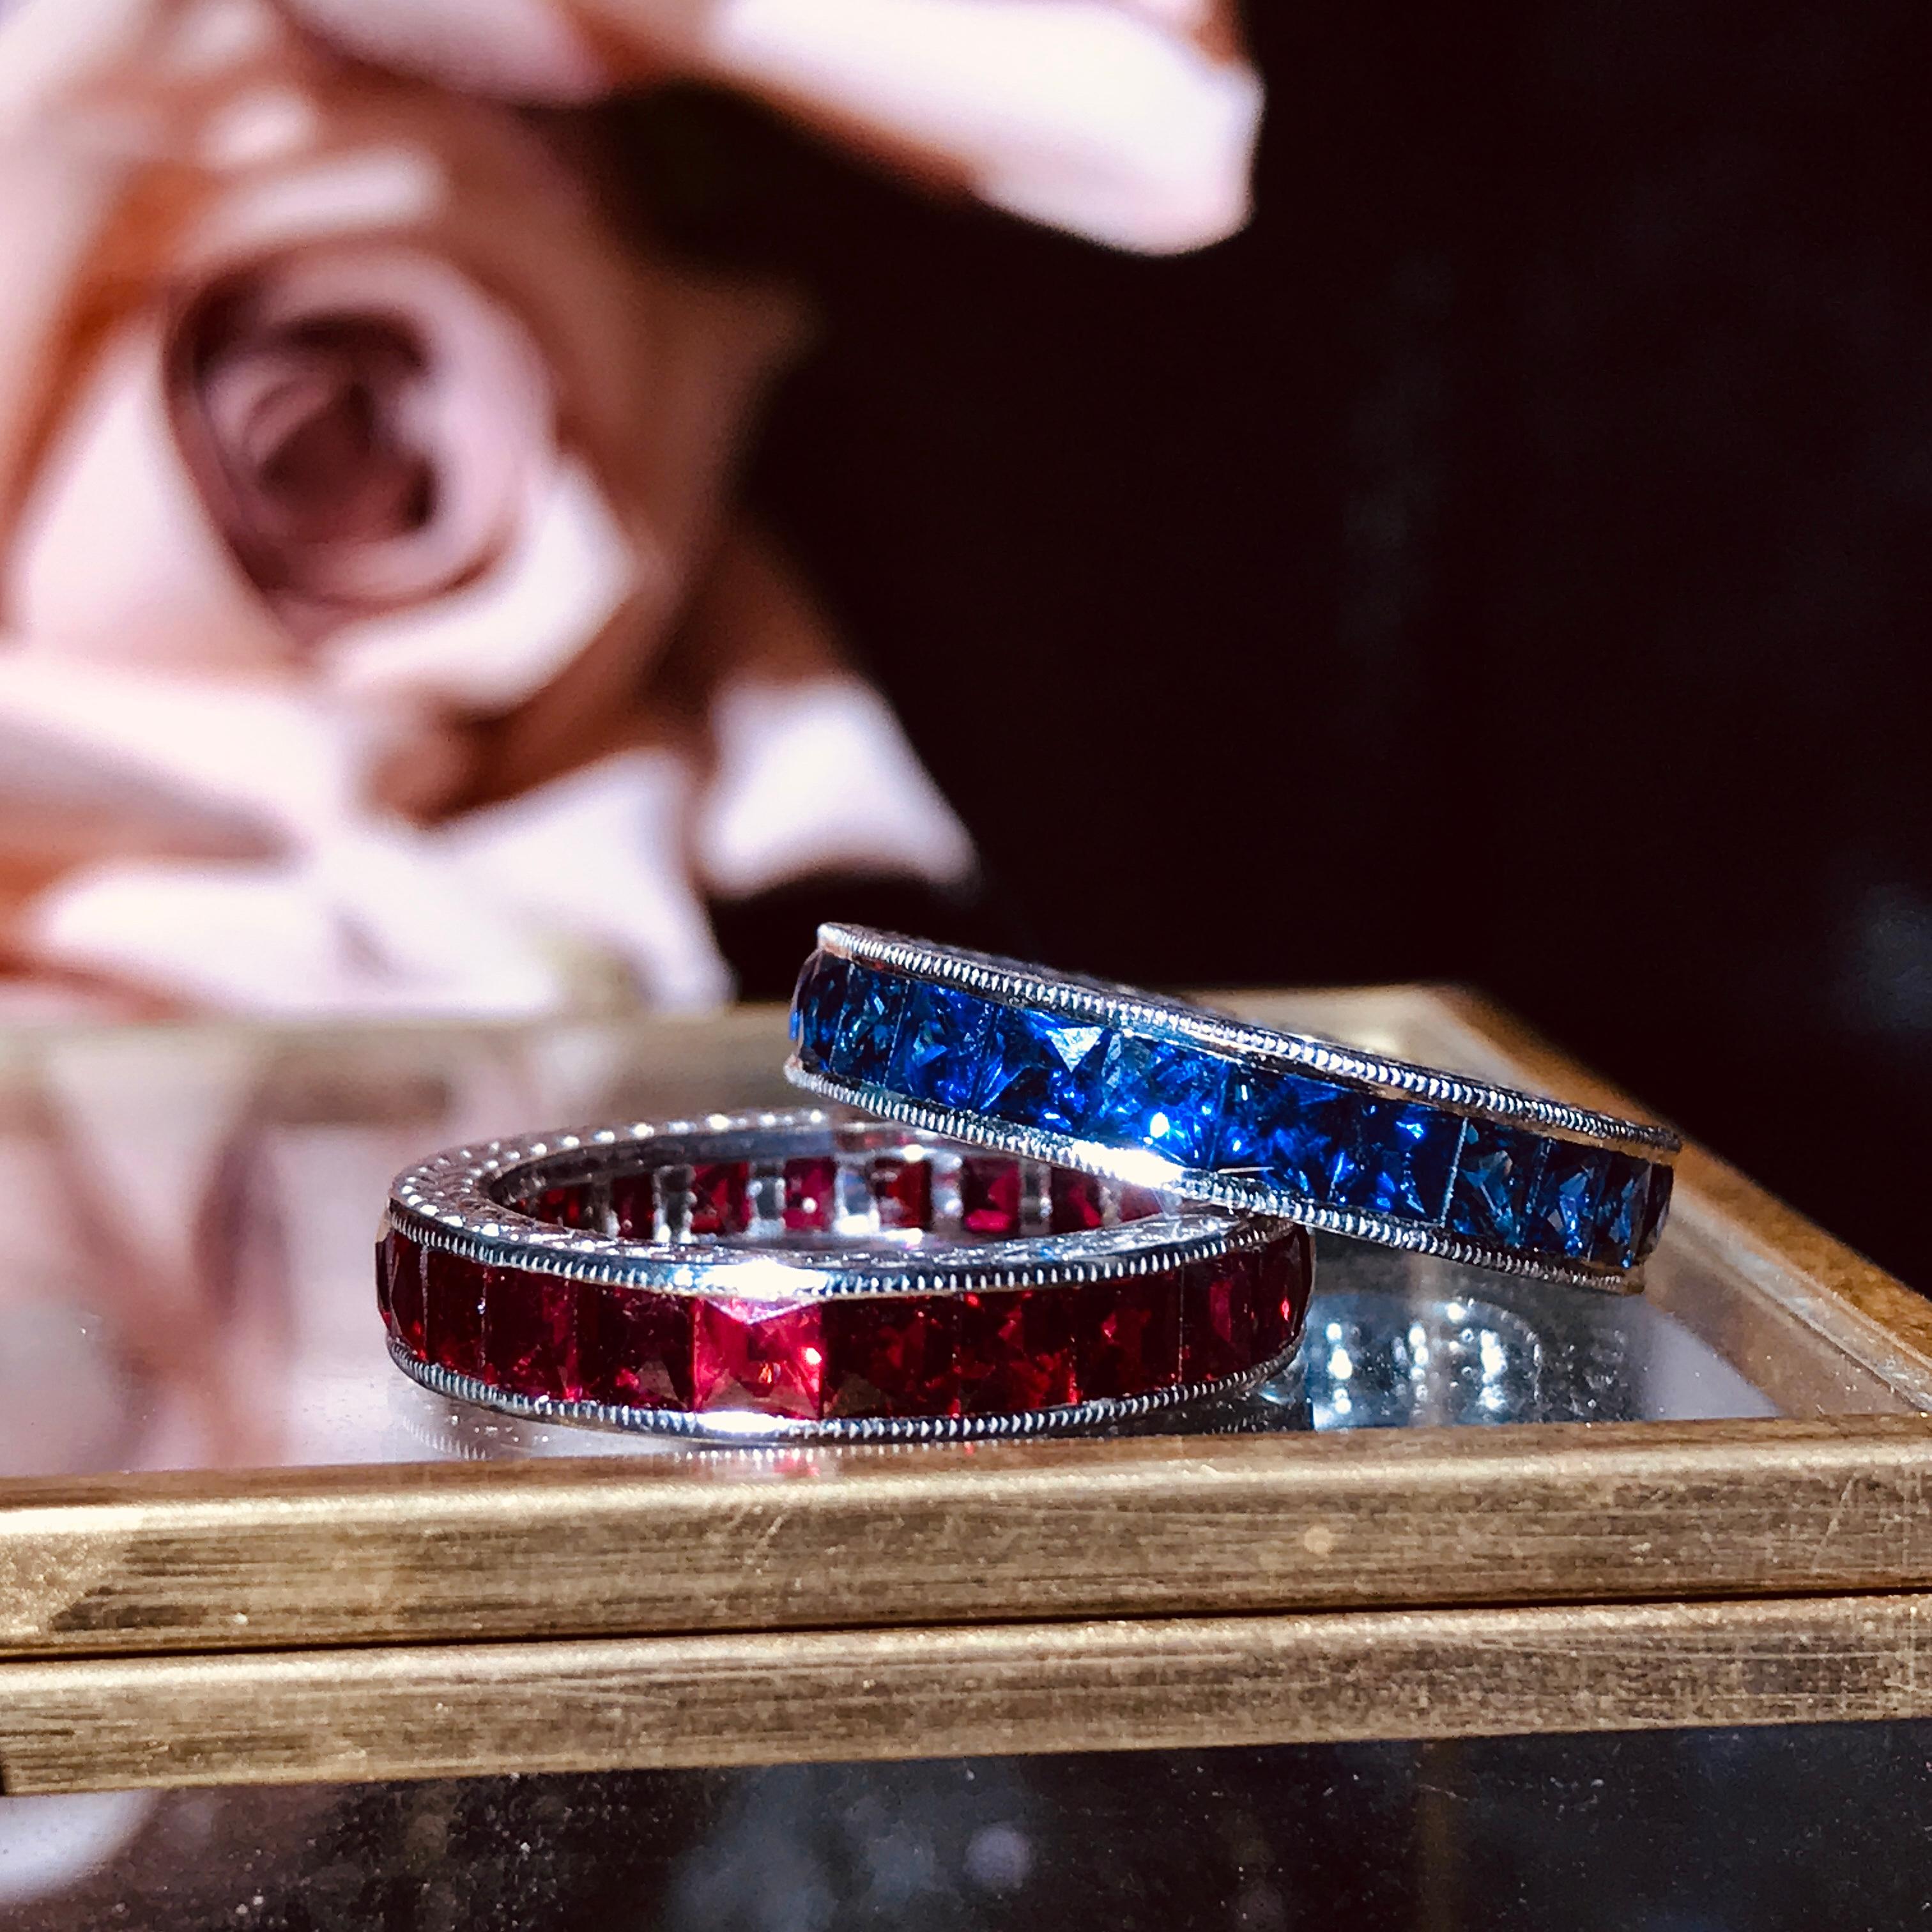 A beautiful ruby eternity band inspired by the Art Deco era. This lovely ring features a row of luscious French cut rubies, which rest in a continuous channel setting. Each delicate ruby displays a vivid red color. This could make a special gemstone